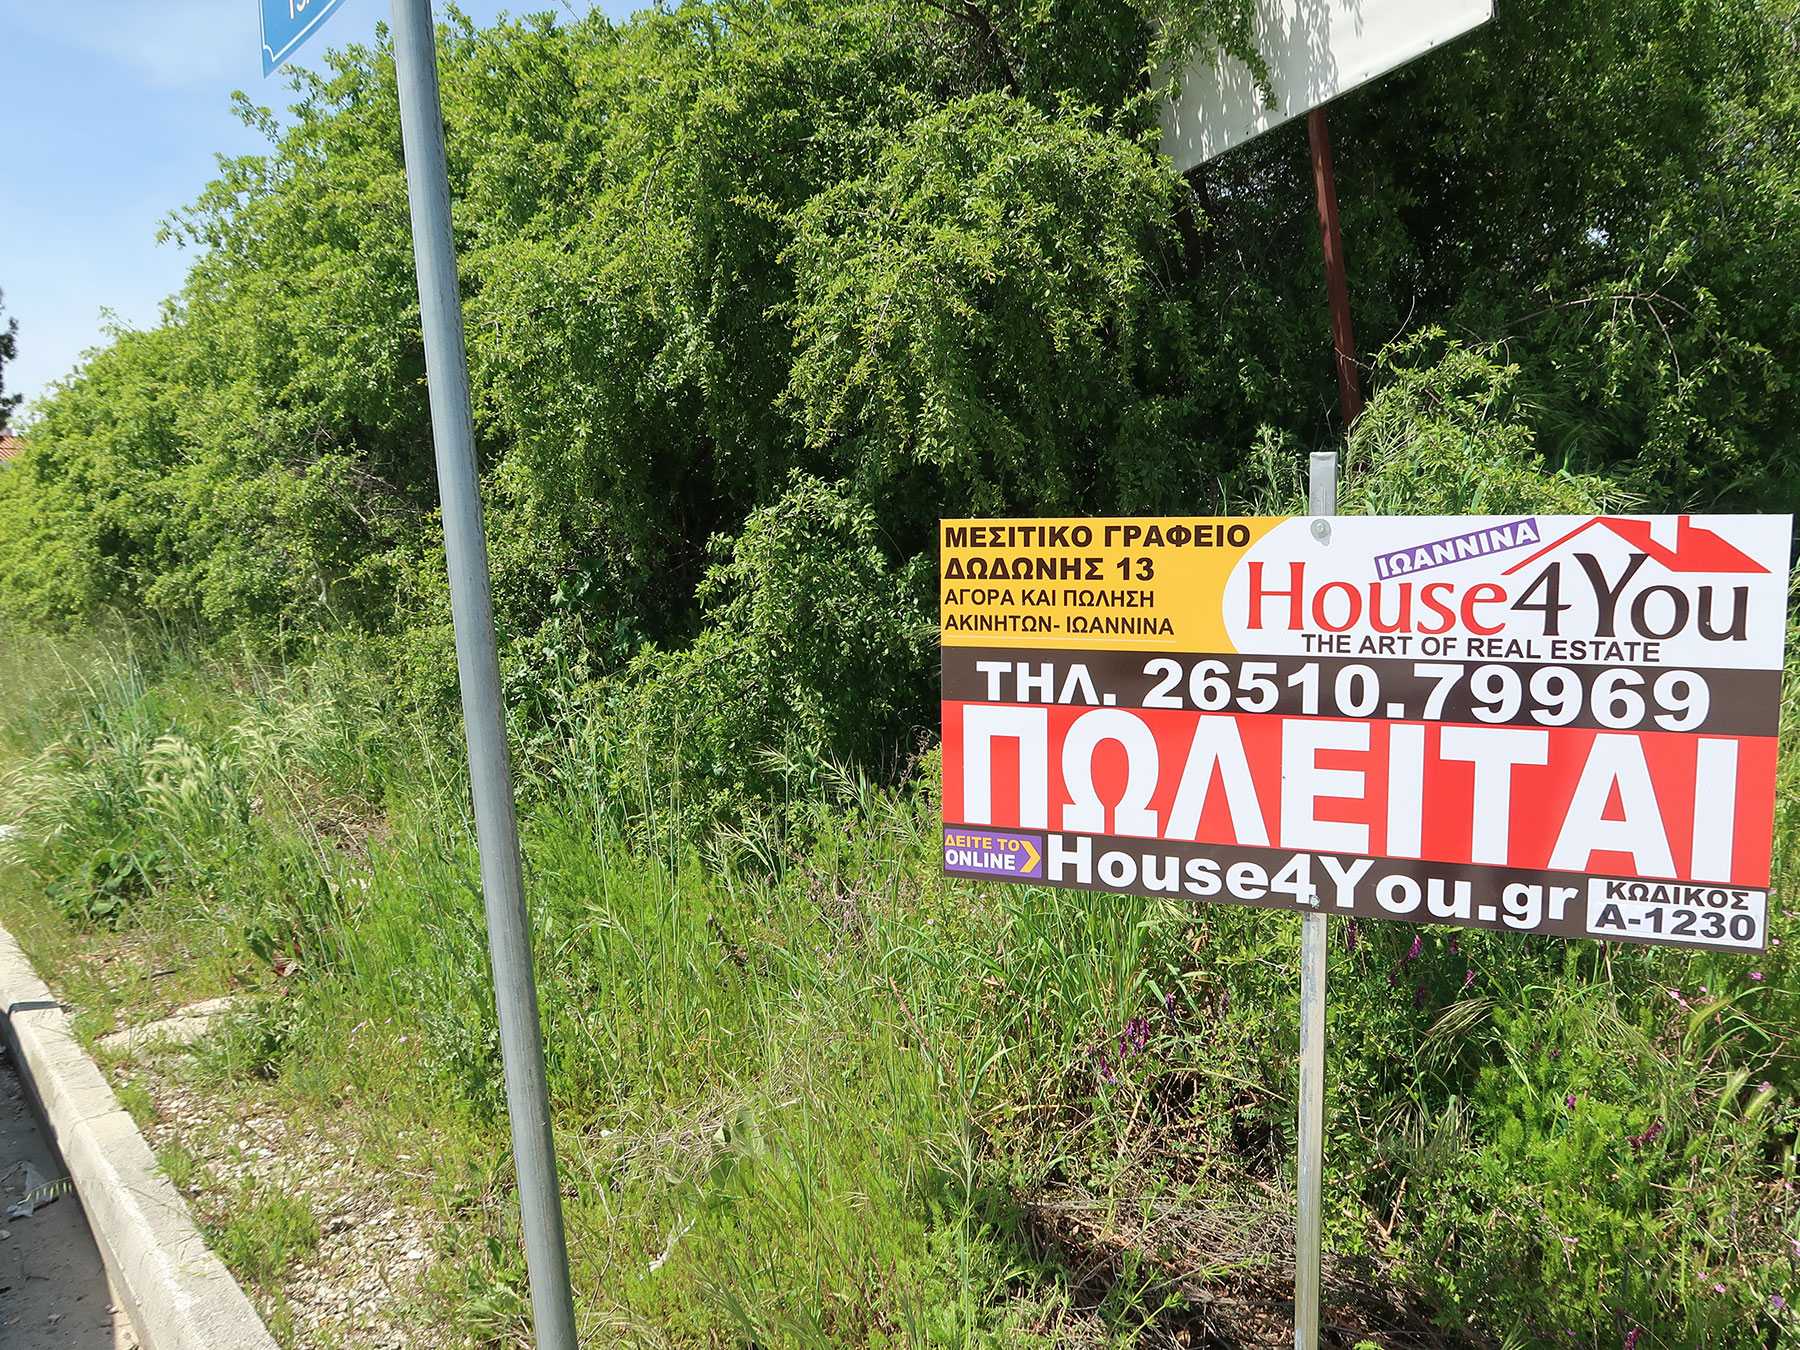 For sale a plot of 646 sq.m. with S.D. 0.5 on Tsakalov in Kardamitsia Ioannina